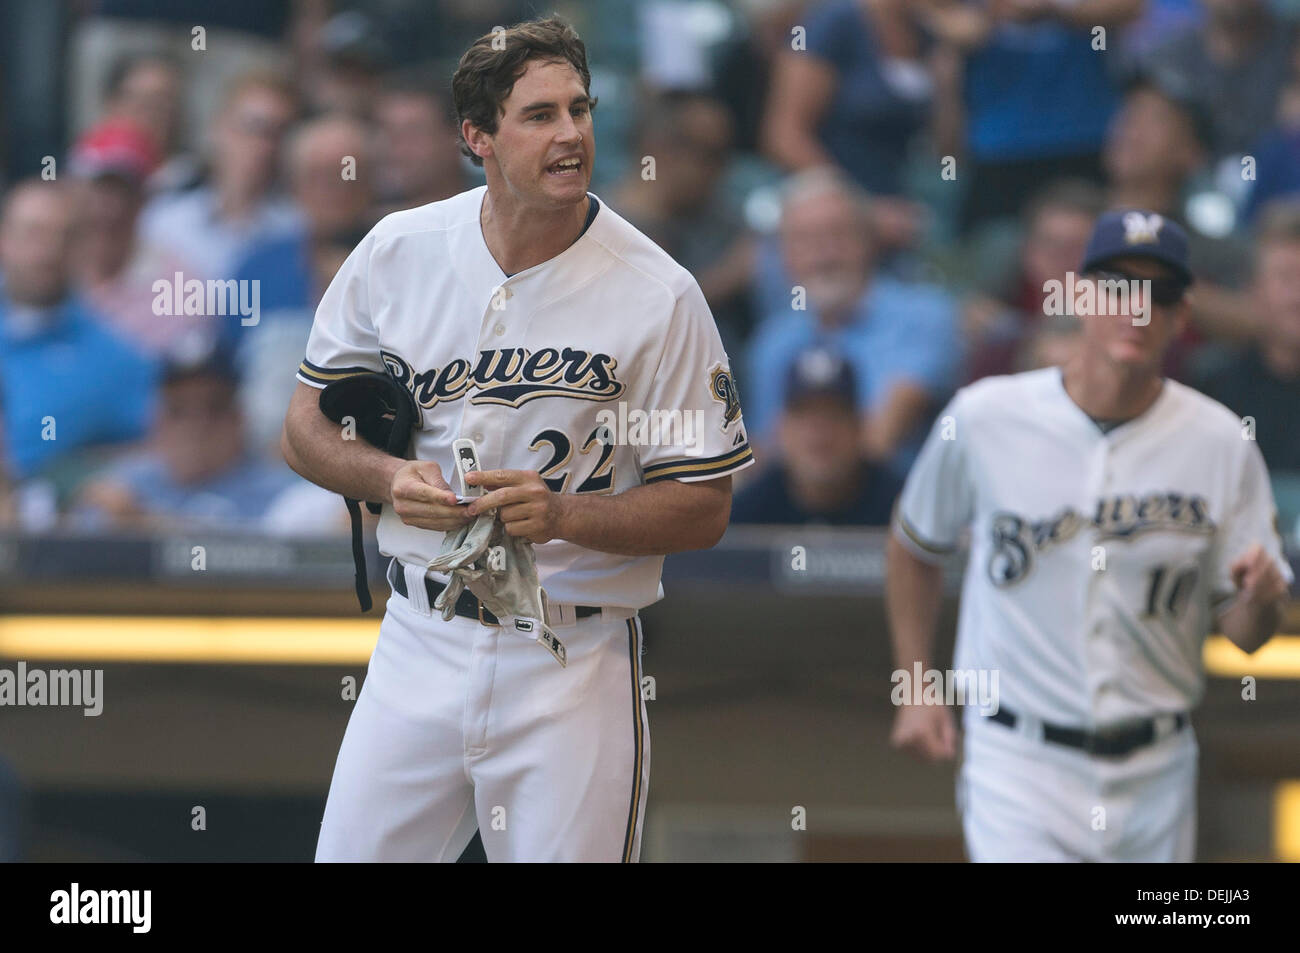 Sept. 19, 2013 - Milwaukee, Wisconsin, United States of America - September 19th, 2013: Milwaukee Brewers left fielder Logan Schafer #22 argues with the home plate umpire after a game ending called strike three during the Major League Baseball game between the Milwaukee Brewers and the Chicago Cubs at Miller Park in Milwaukee, WI. Cubs beat the Brewers 5-1. John Fisher/CSM Stock Photo